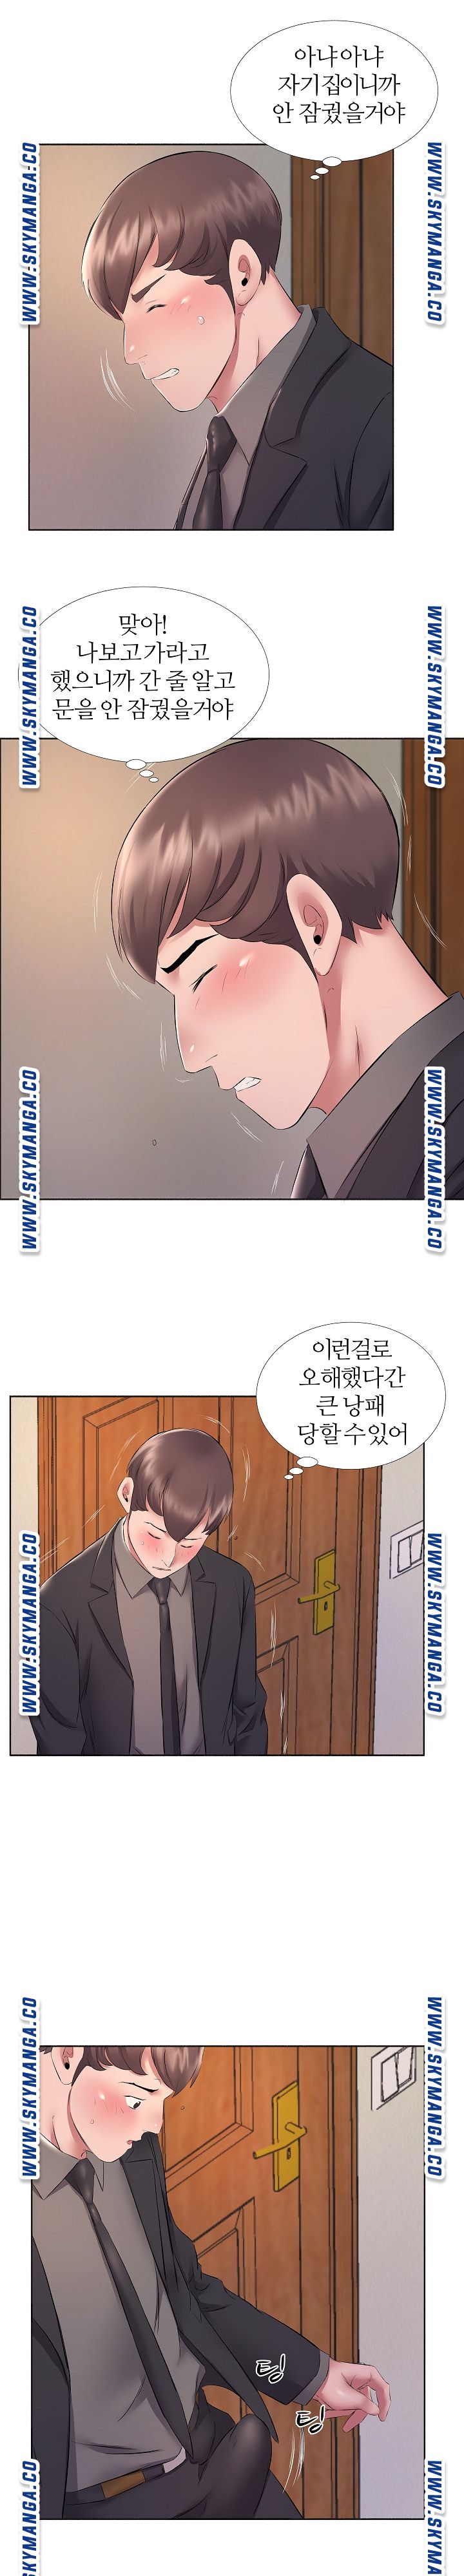 One Room Hotel Raw - Chapter 10 Page 11